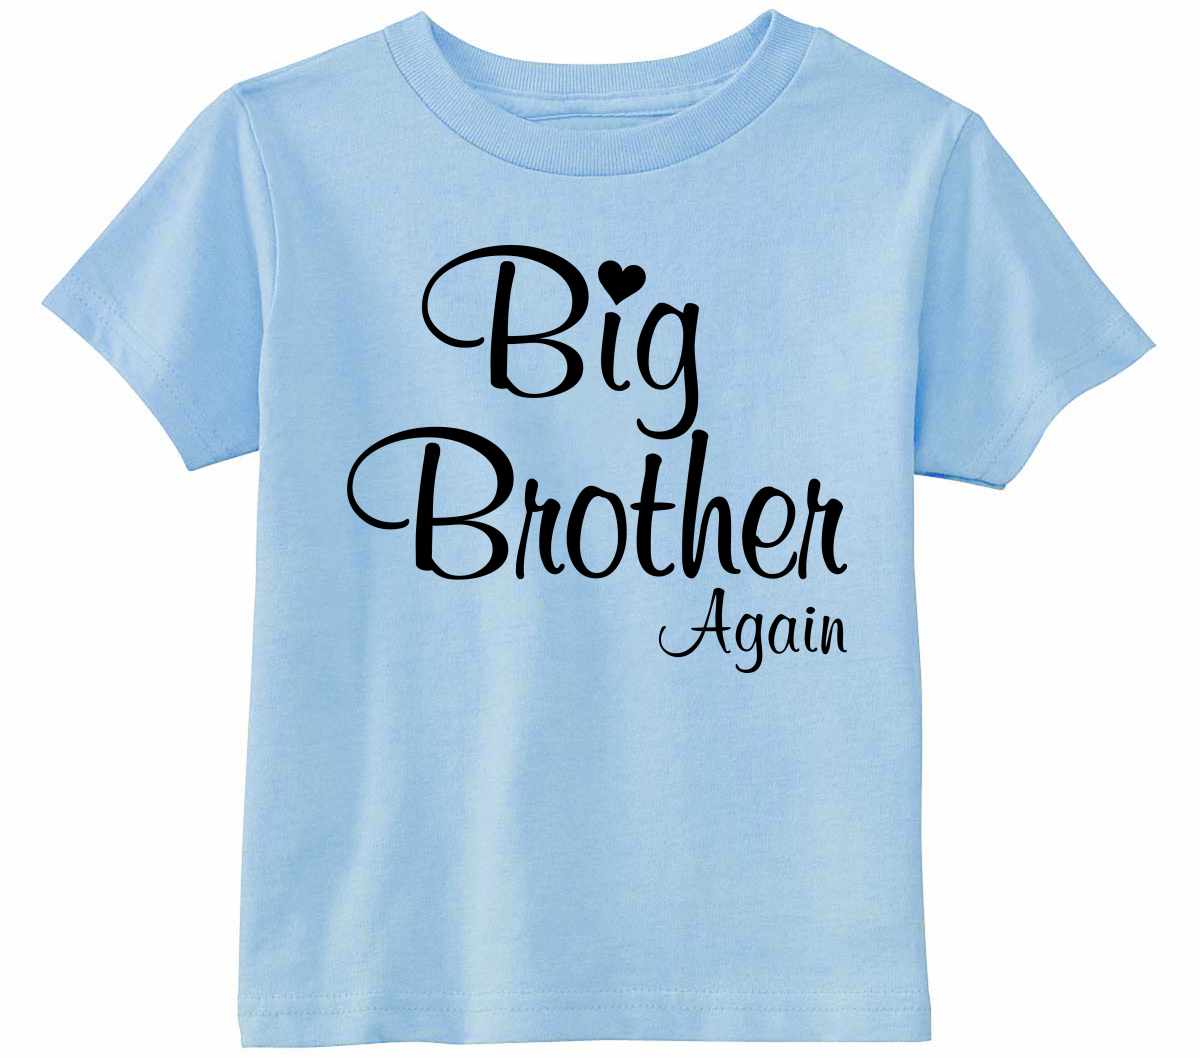 Big Brother Again on Infant-Toddler T-Shirt (#1337-7)